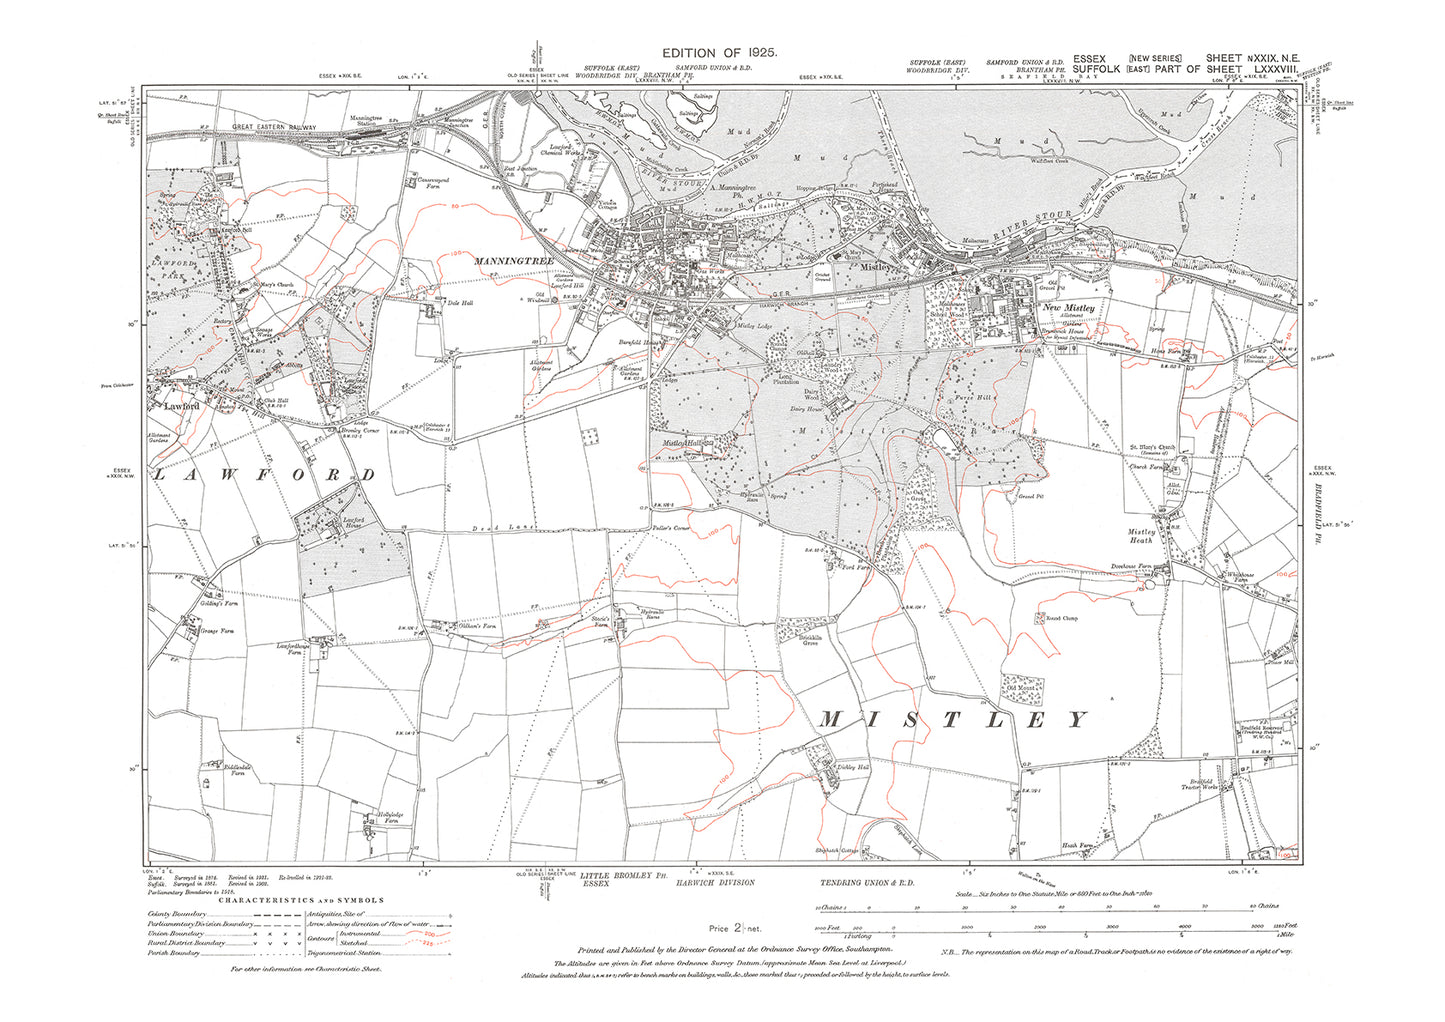 Old OS map dated 1925, showing Manningtree, Mistley, Mistley Heath and Lawford (east) in Essex - 29NE